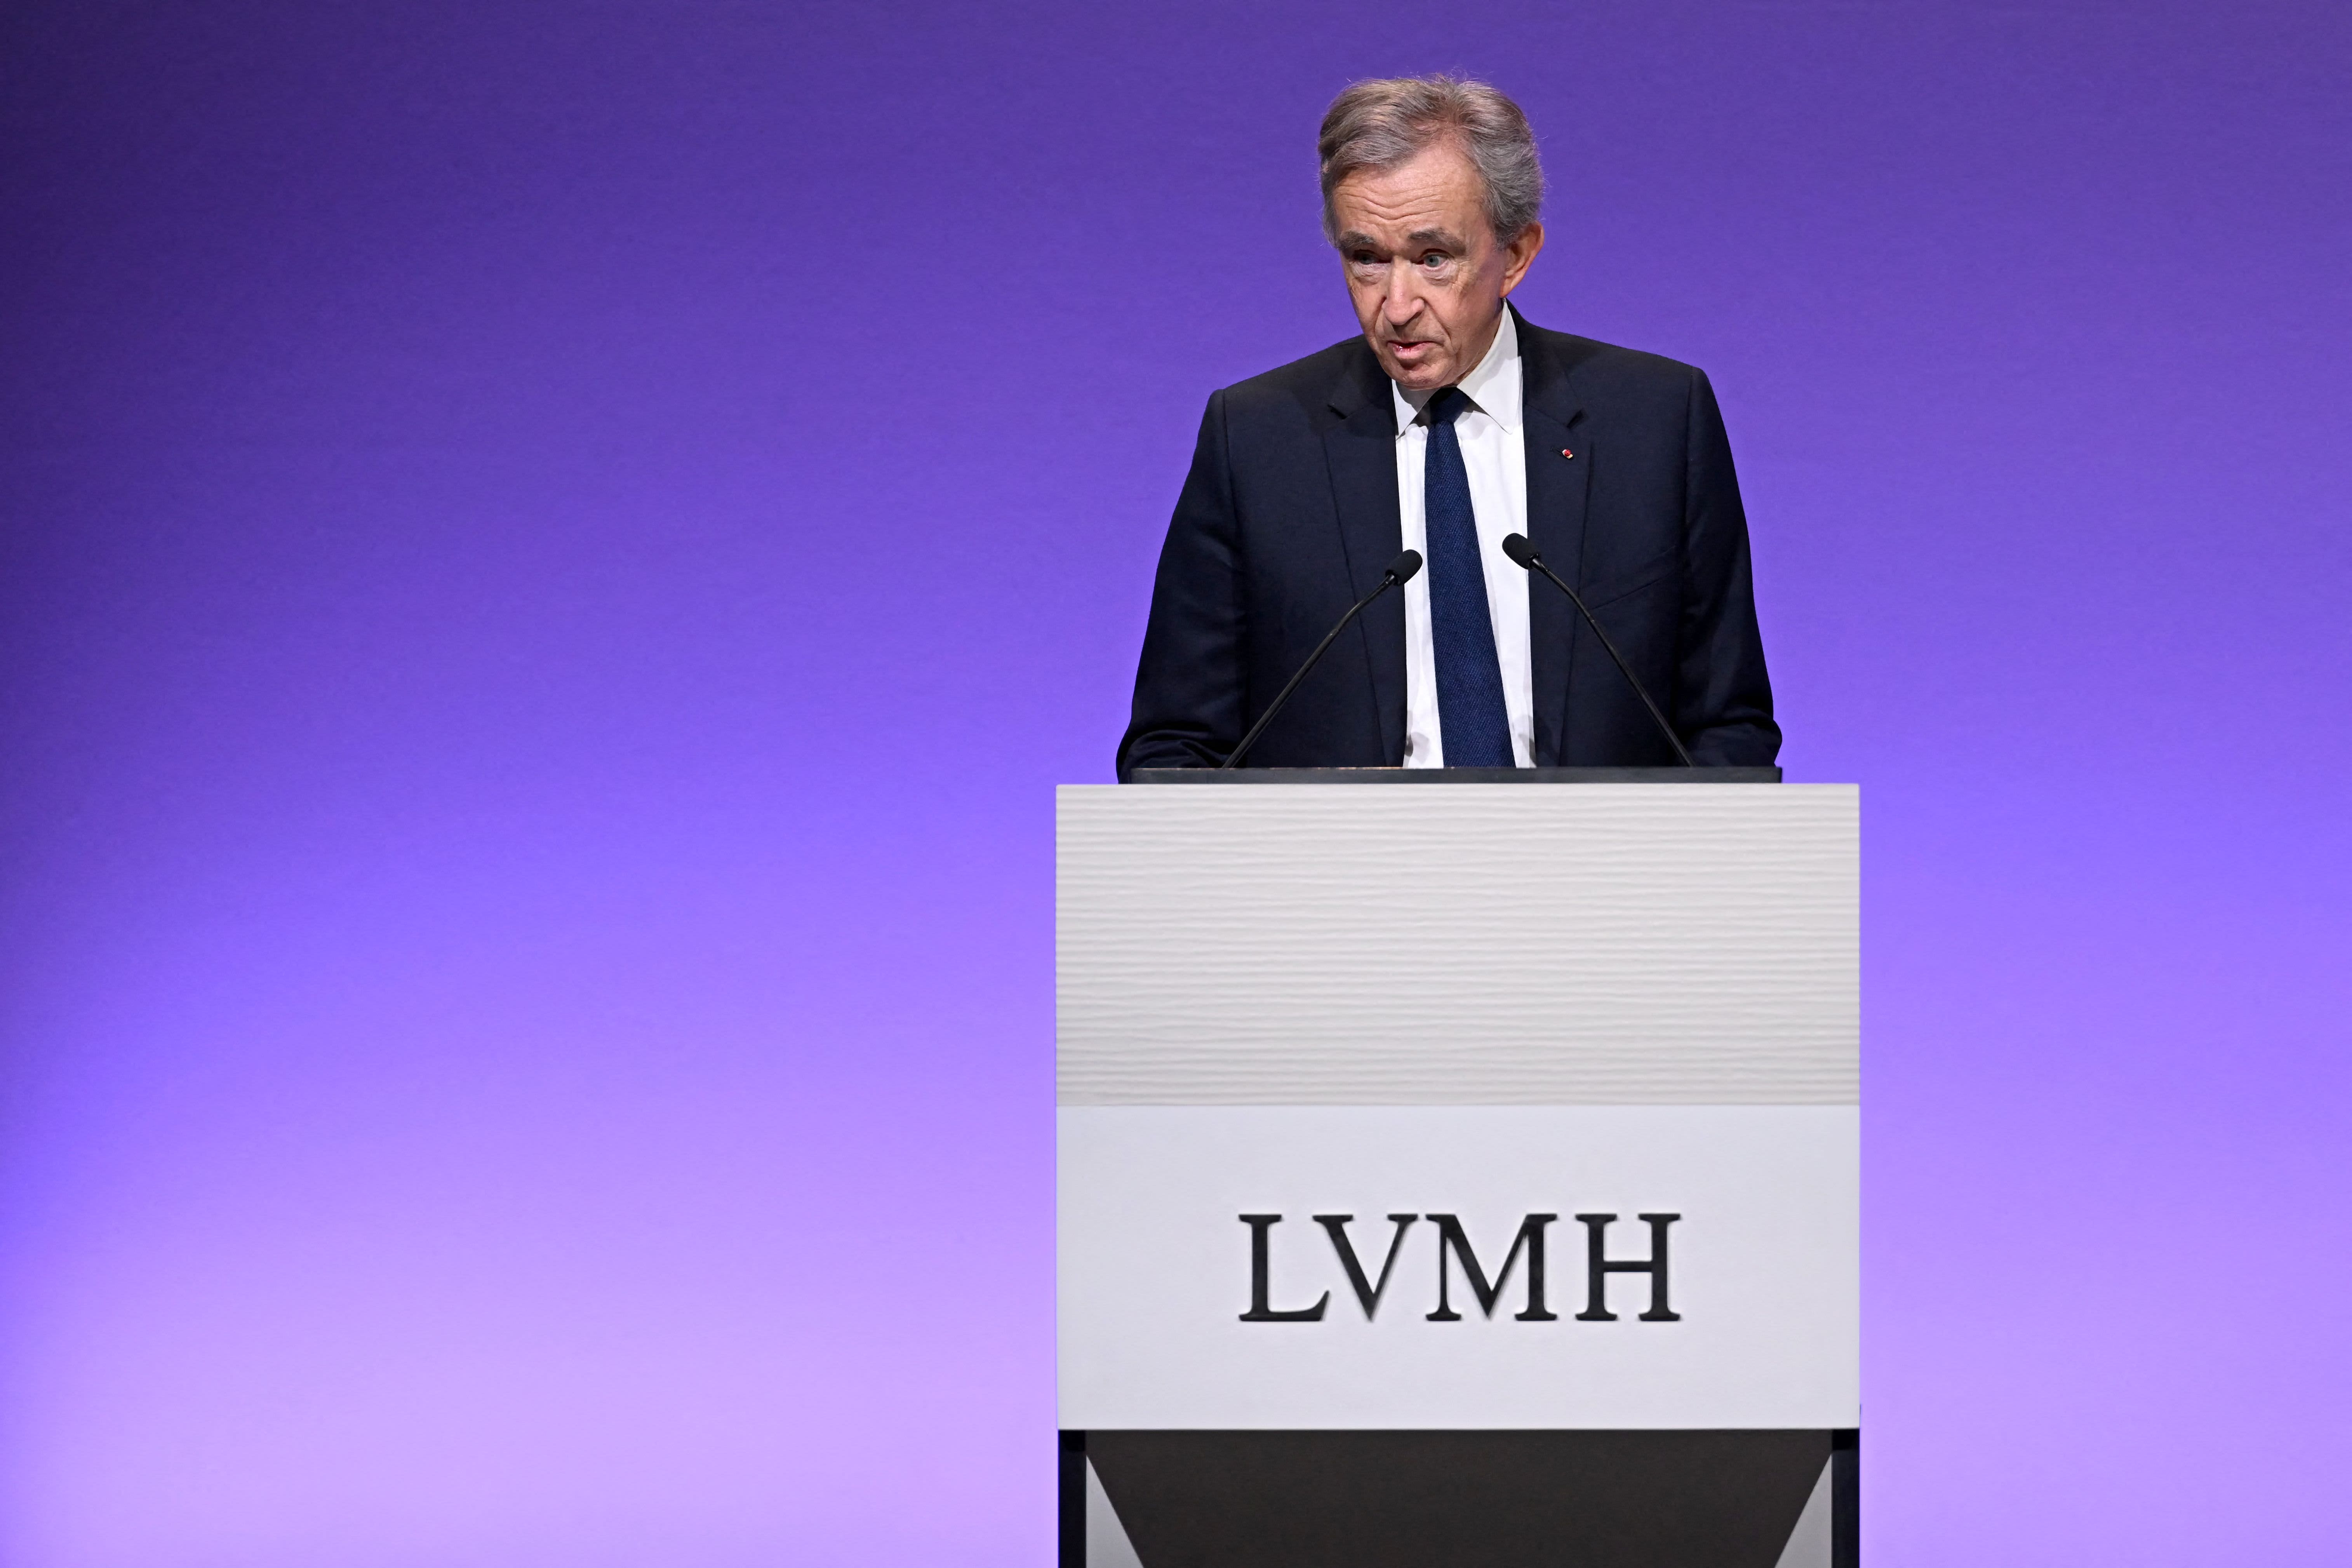 LVMH Has Been Working to Revamp its Image After Decades of